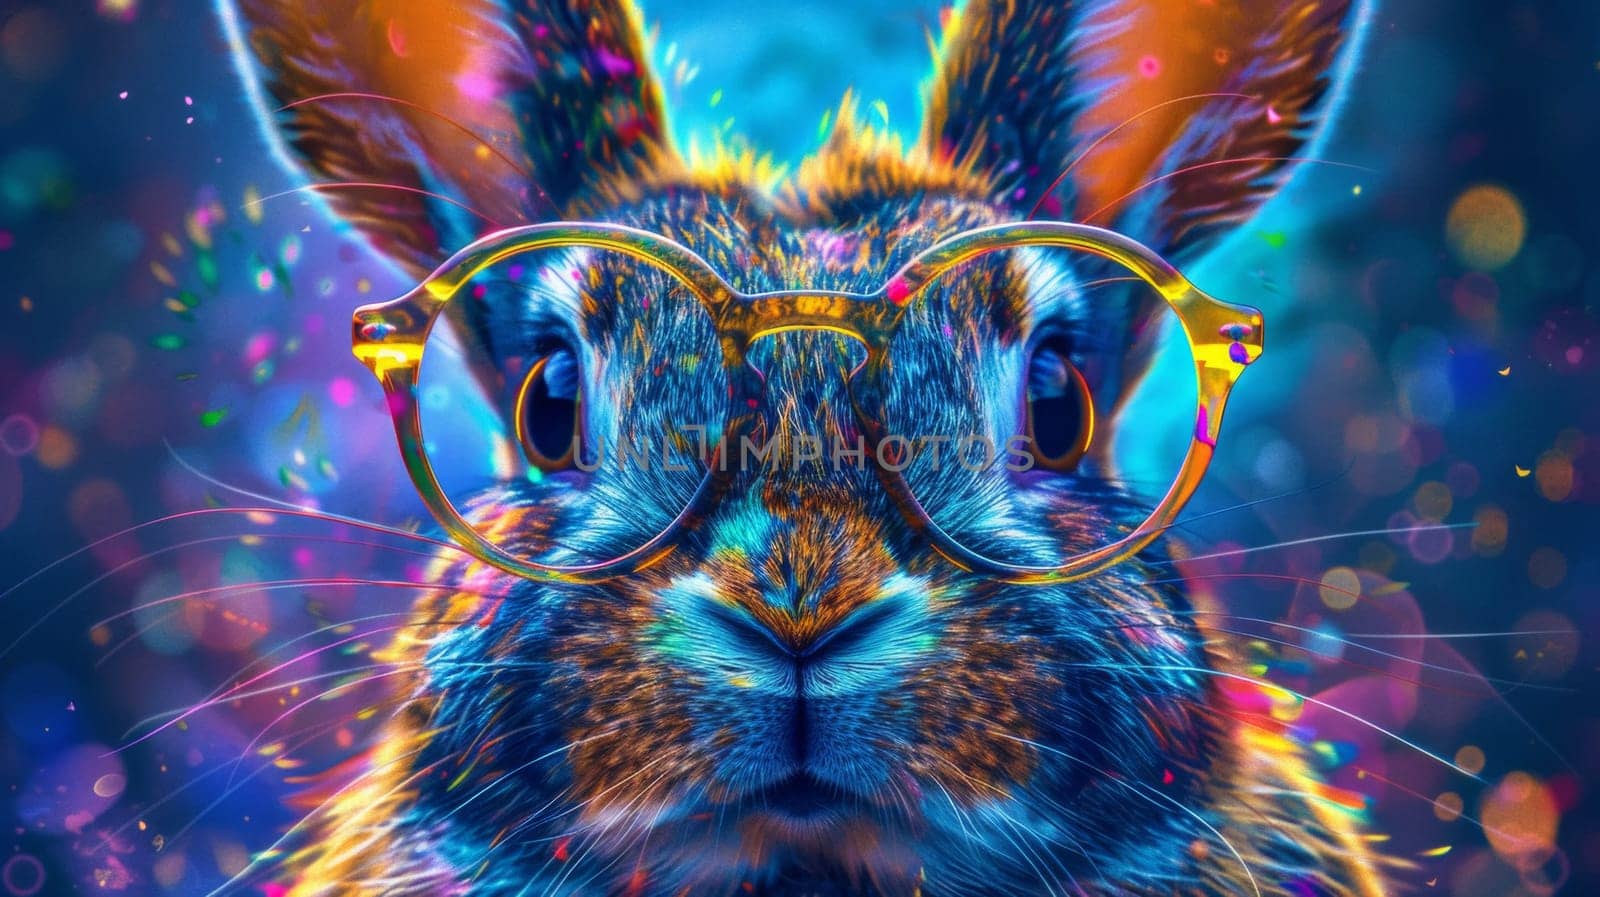 A close up of a rabbit wearing glasses with colorful background